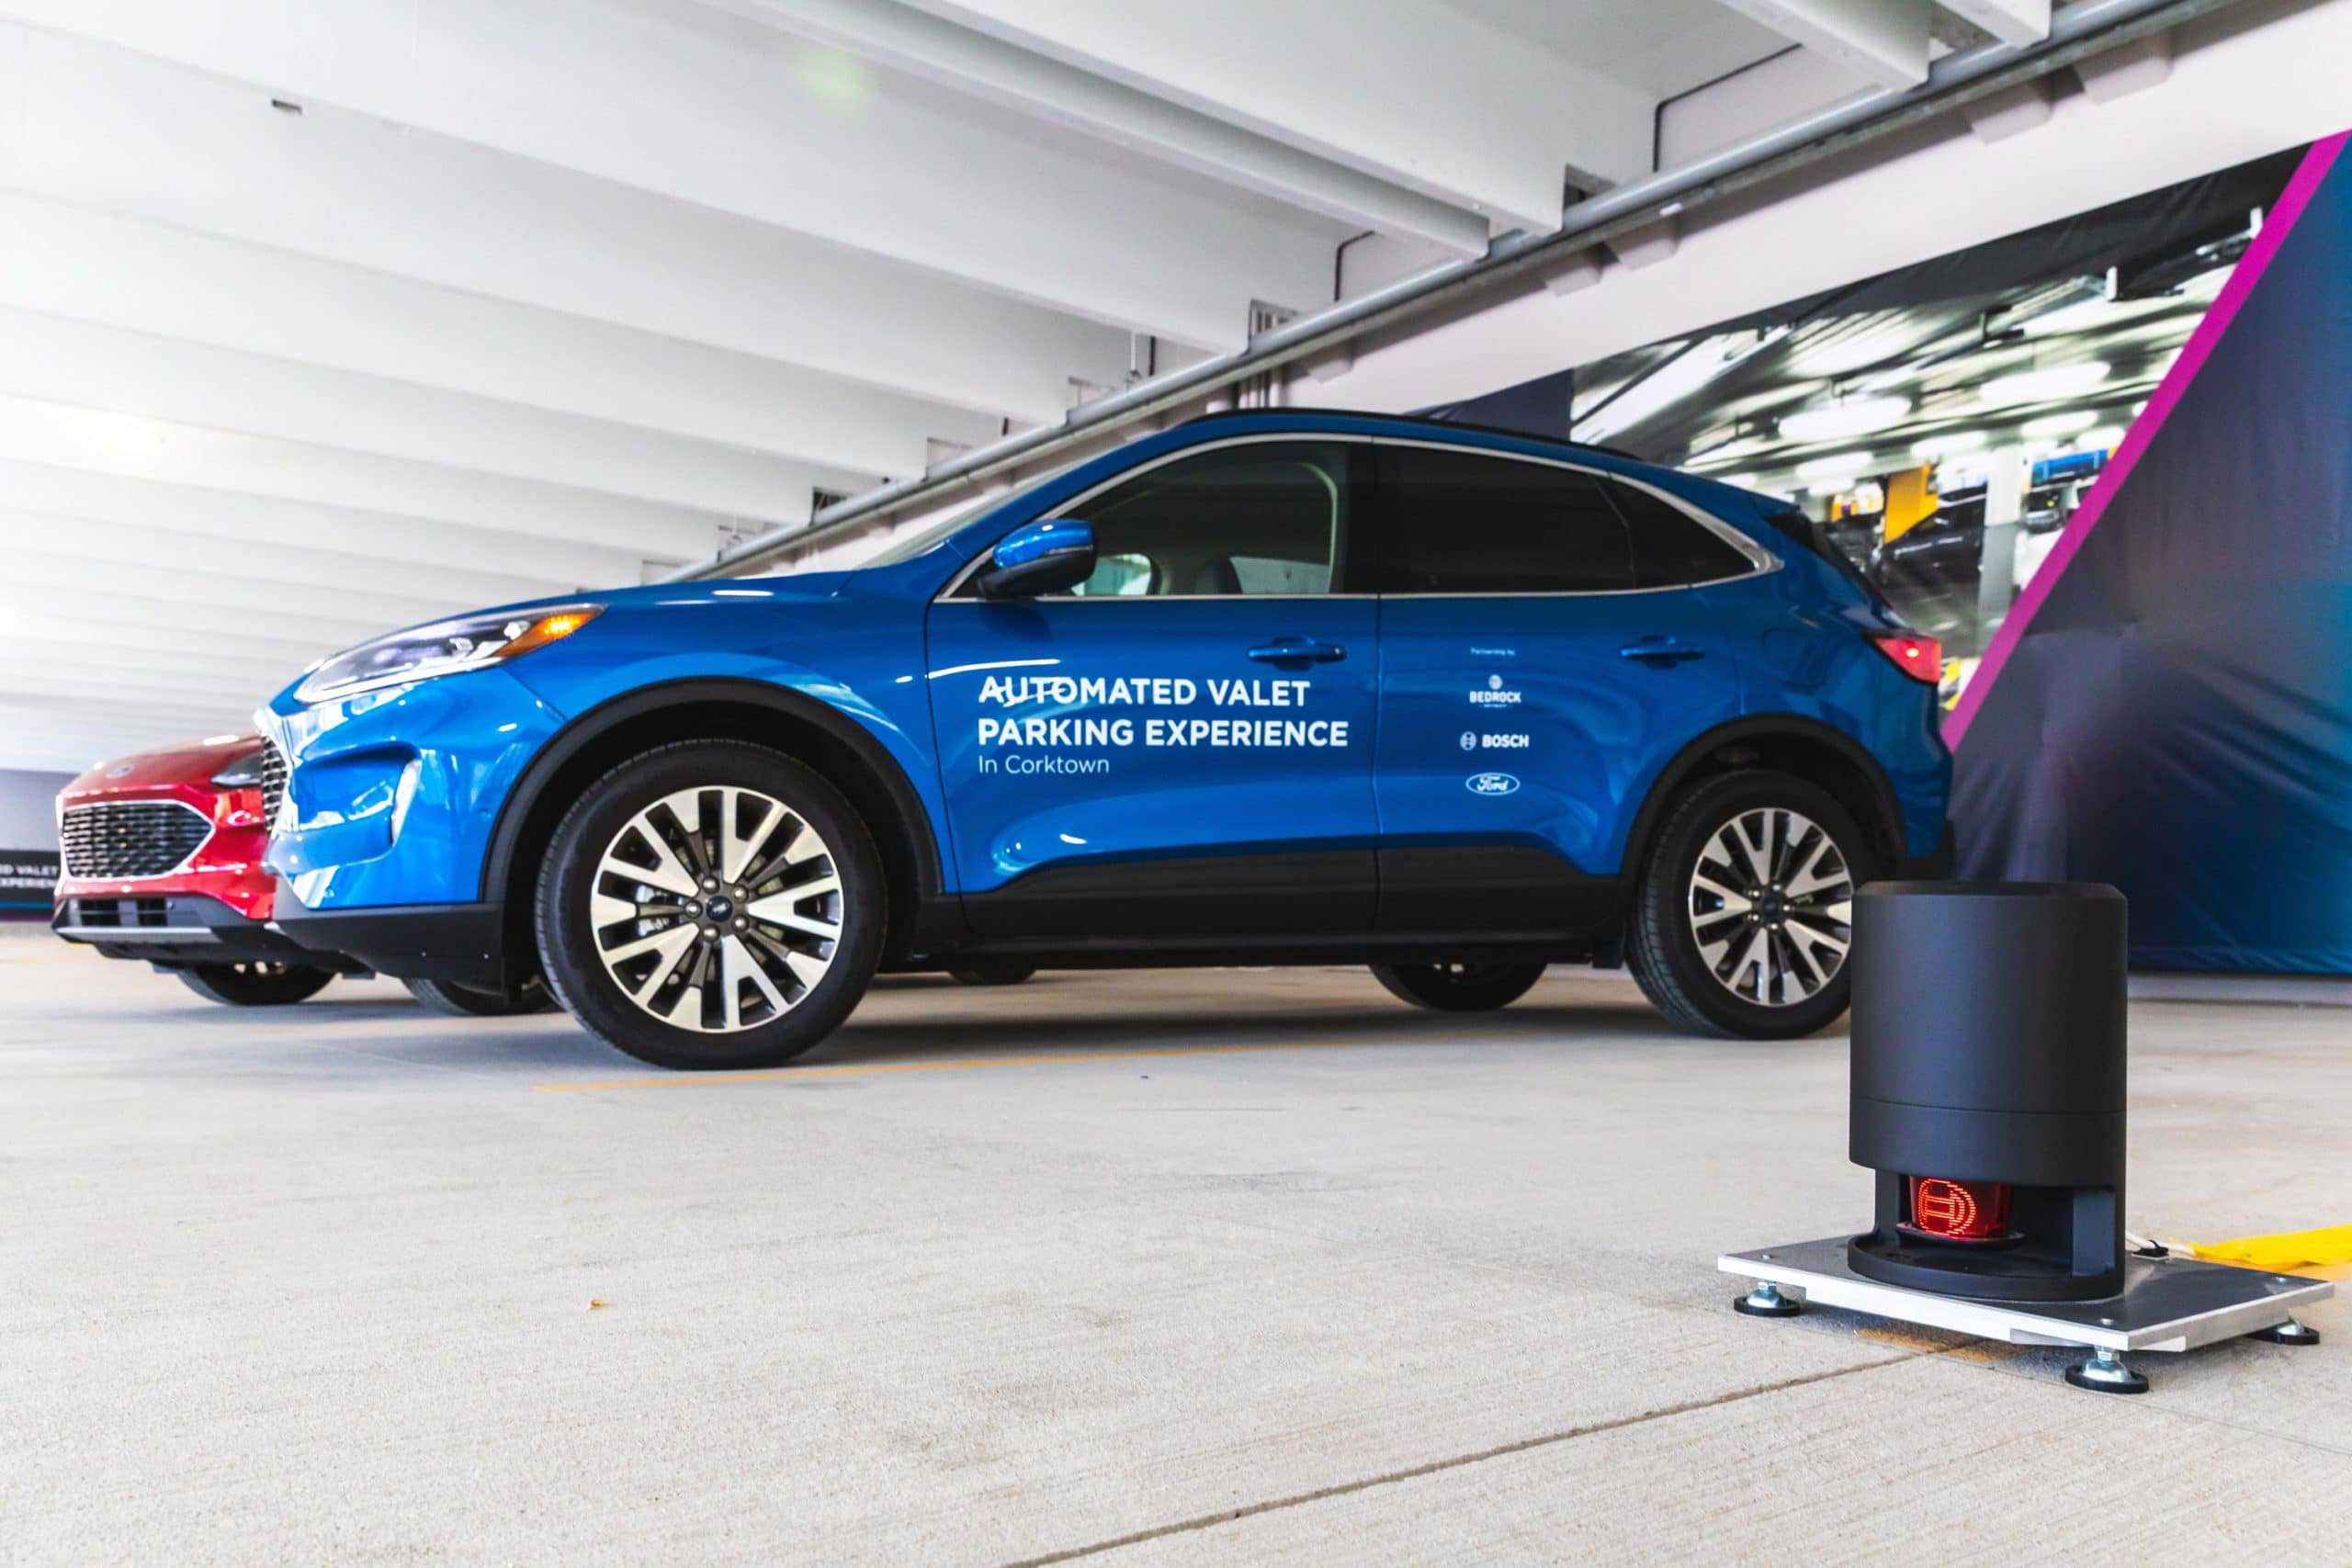 Ford, Bedrock and Bosch explore Automated Vehicle Technology